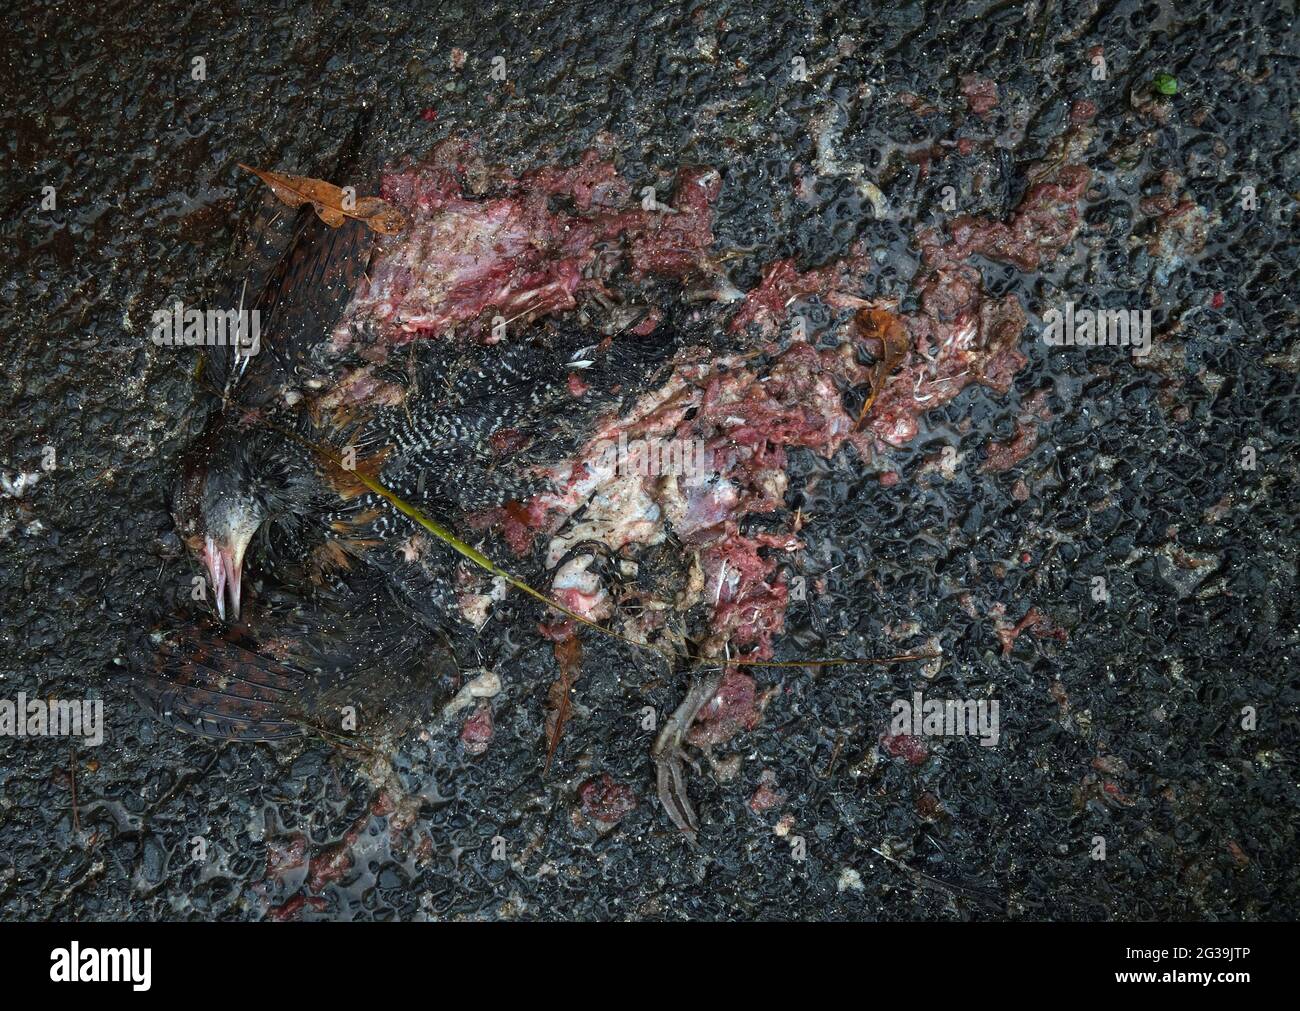 Native bird (Gallirallus philippensis) squashed by car on road, Lord Howe Island, NSW, Australia. Stock Photo